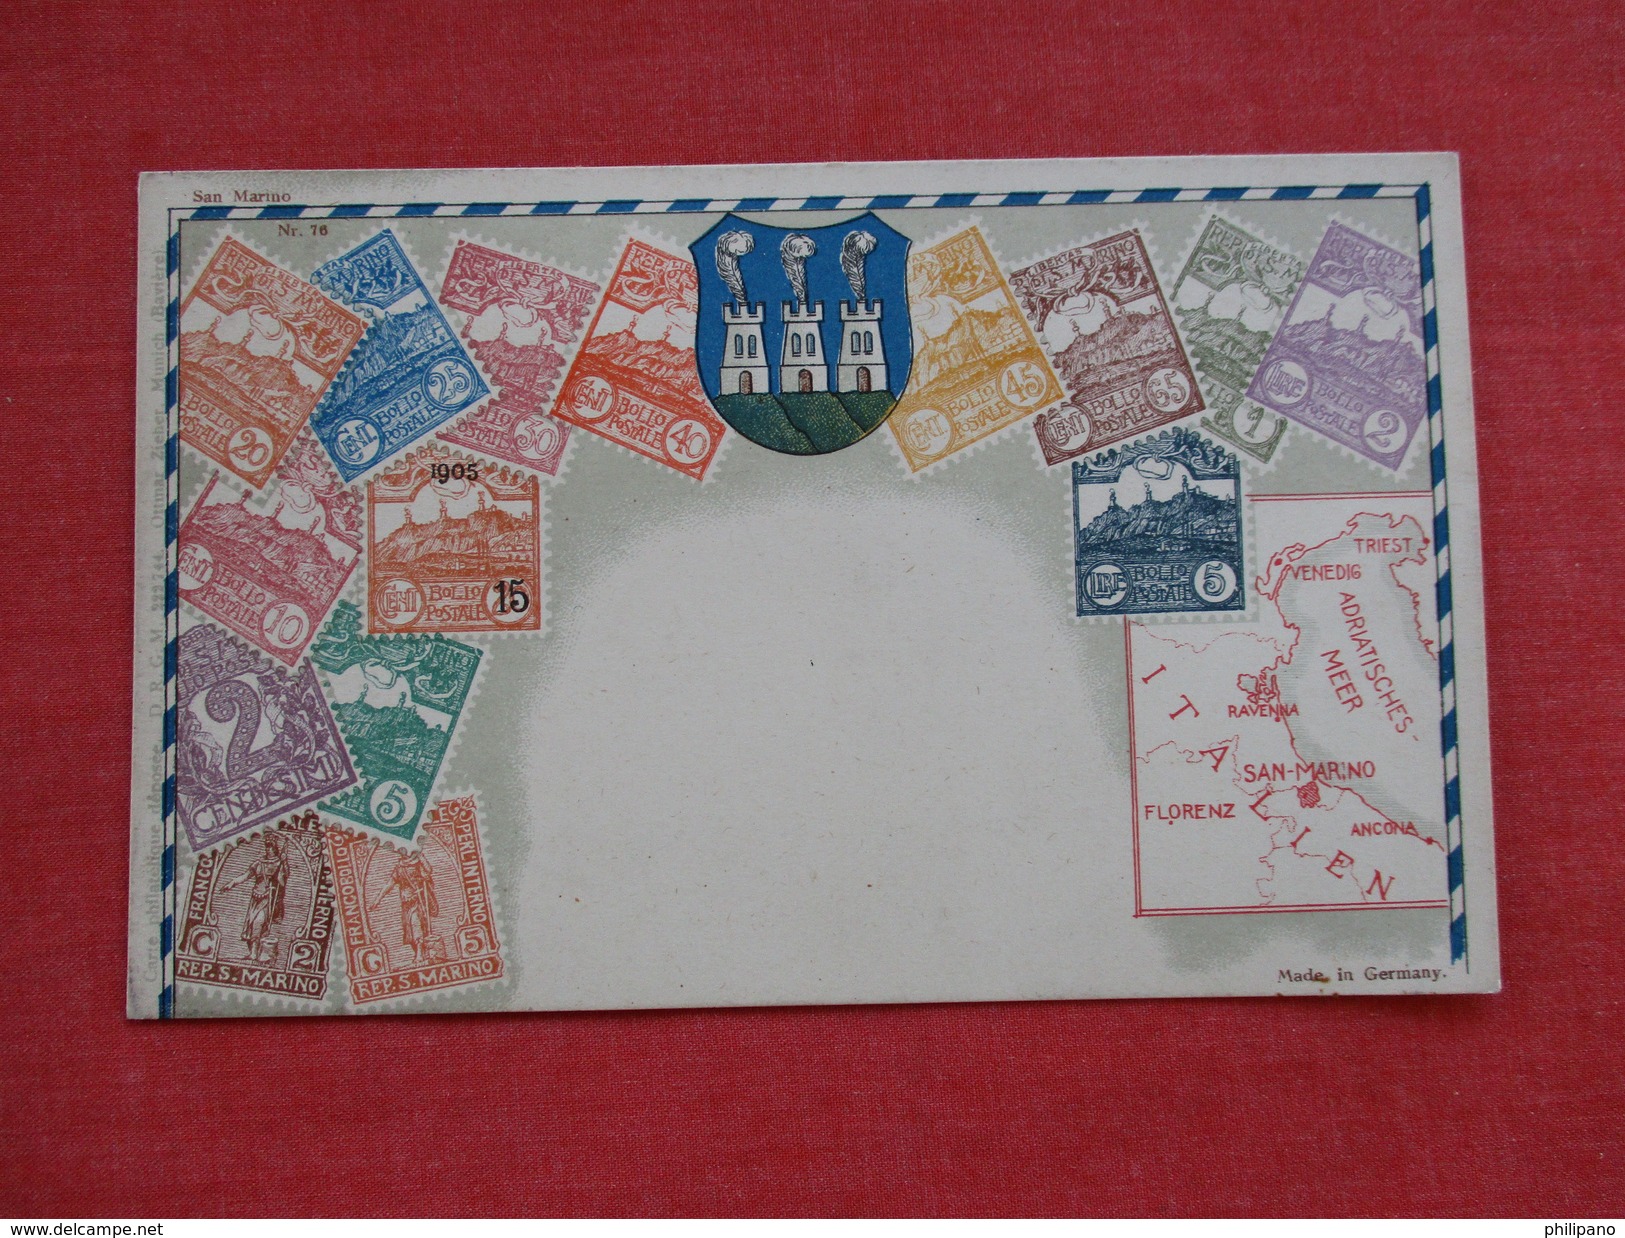 San Marino Stamps -- Paper Residue Back     Ref 2765 - Stamps (pictures)